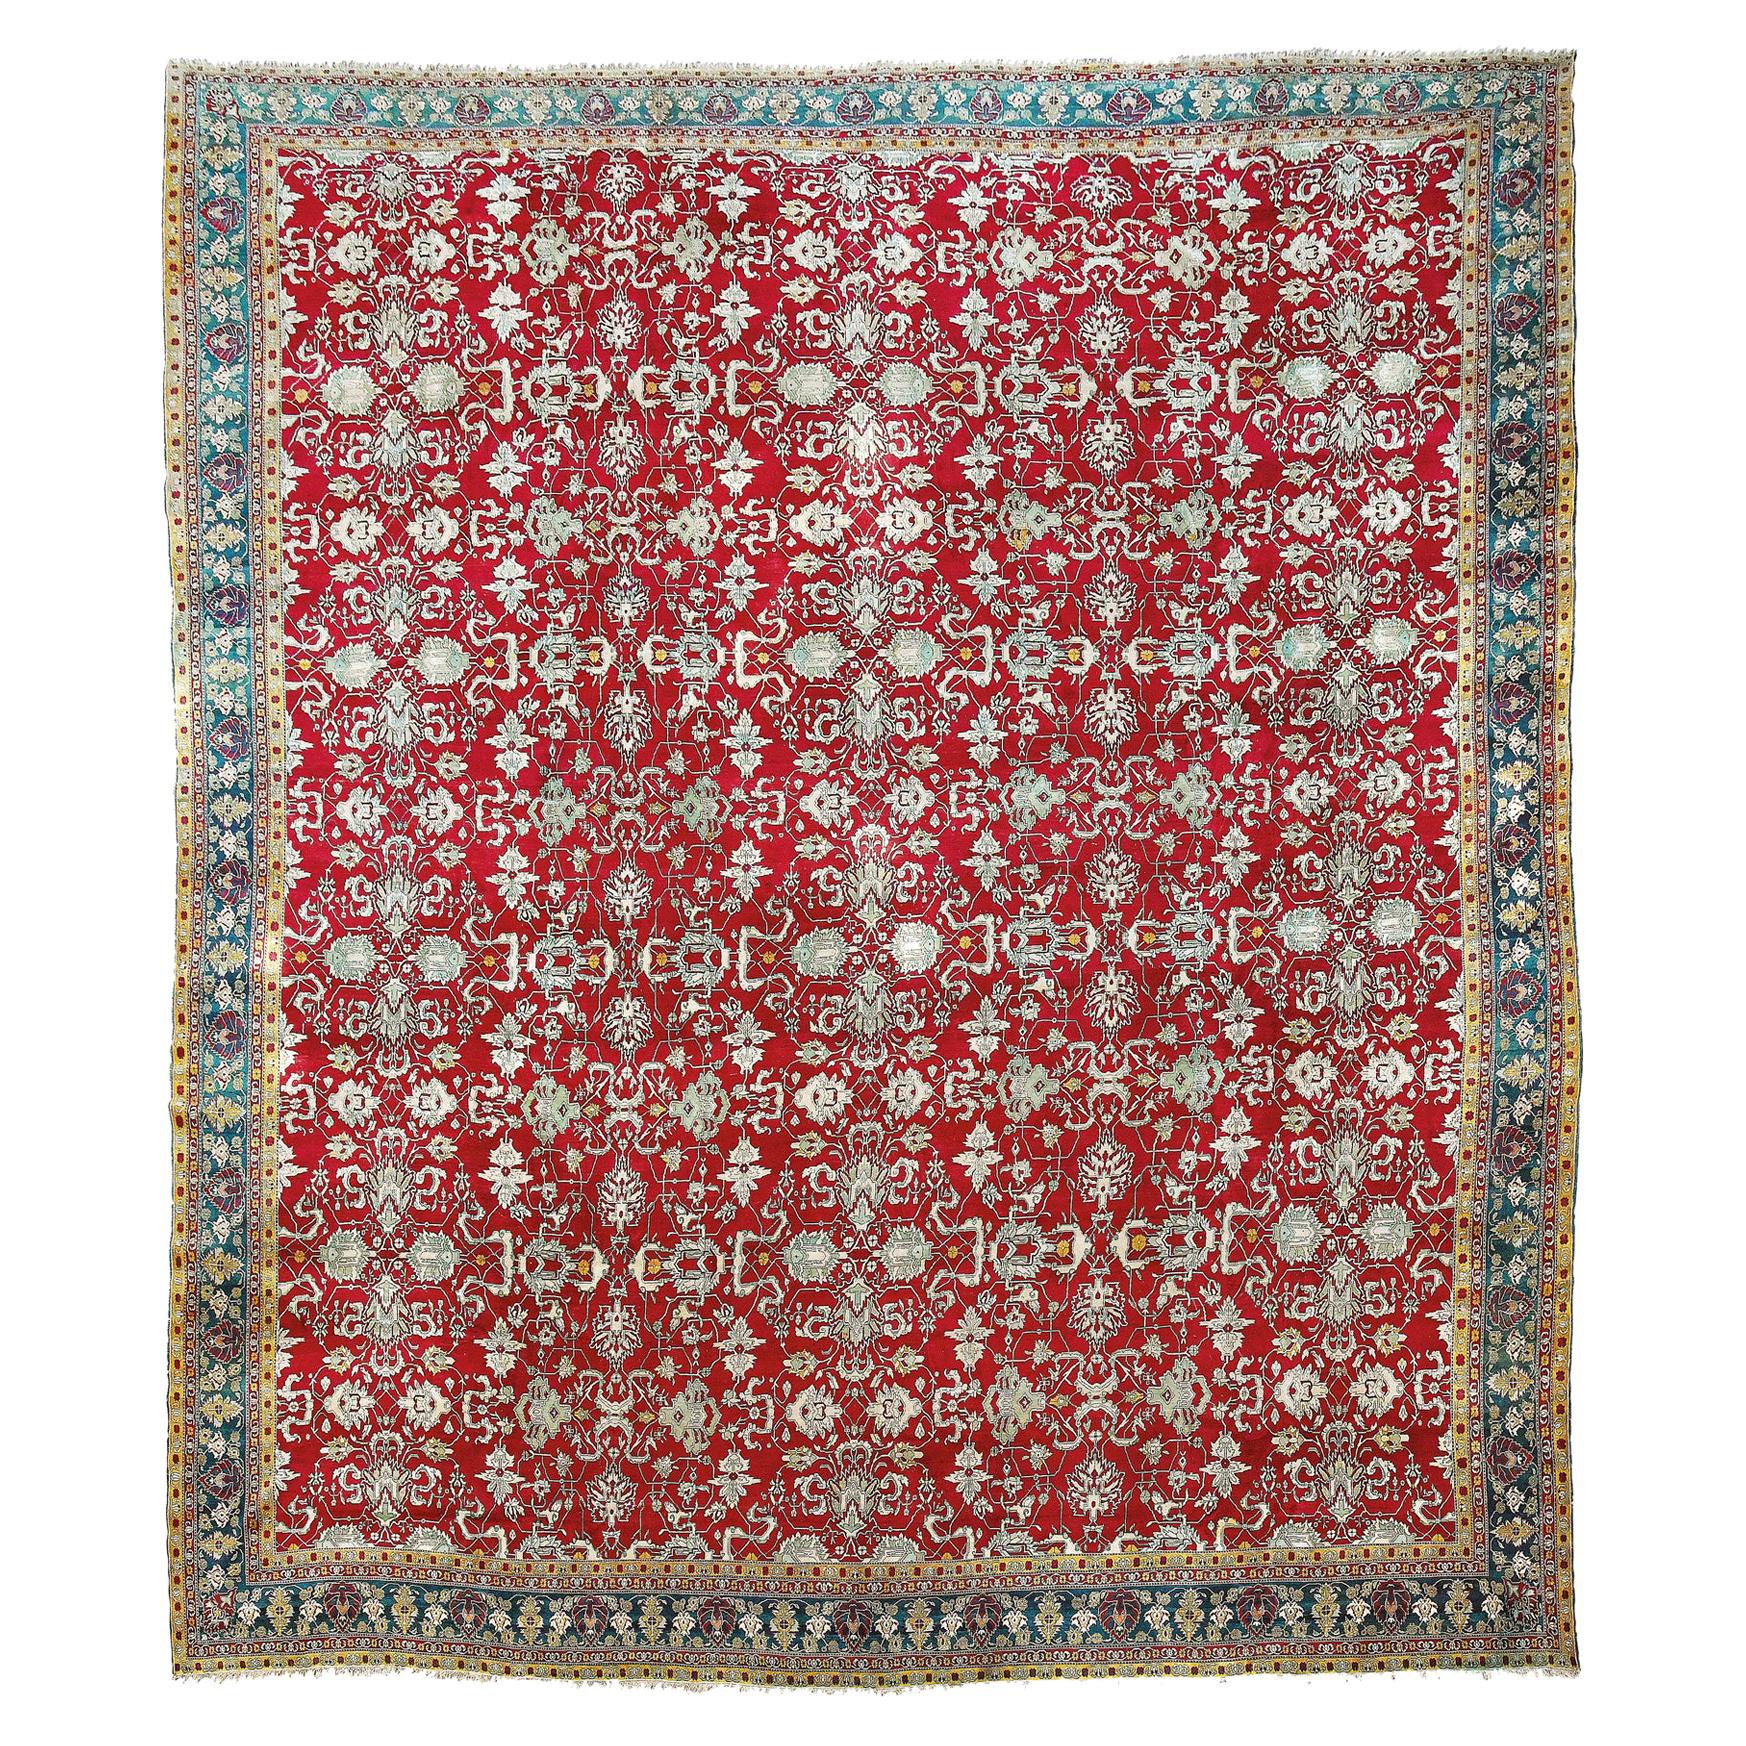 Oversized Indian Red & Green Wool Agra Palace Carpet, 19th Century